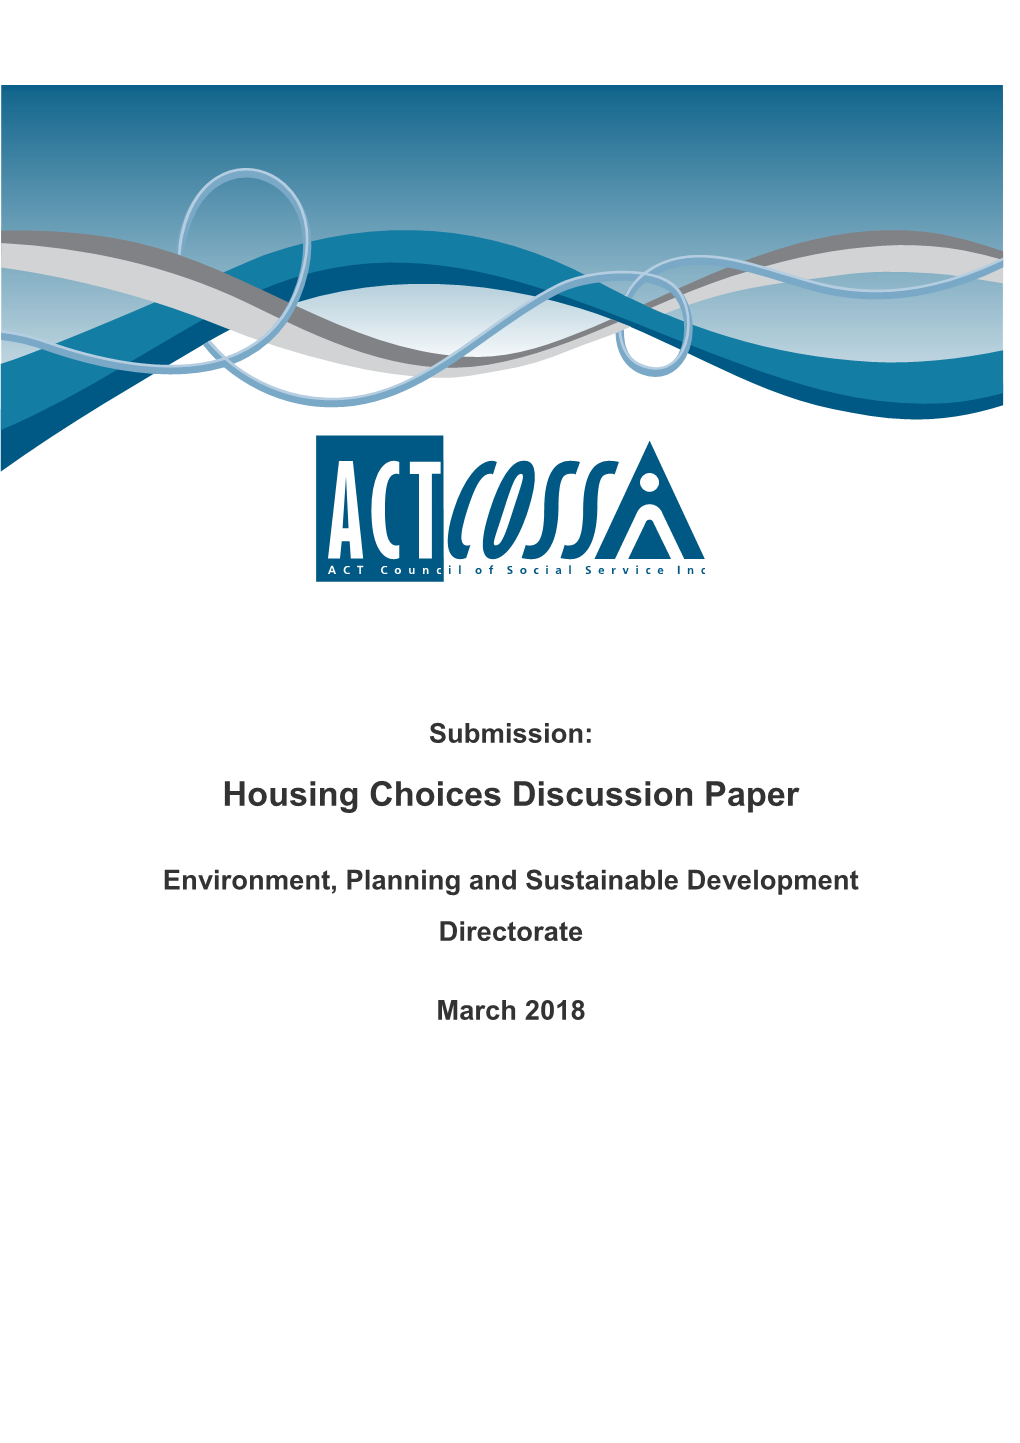 Submission: Housing Choices Discussion Paper